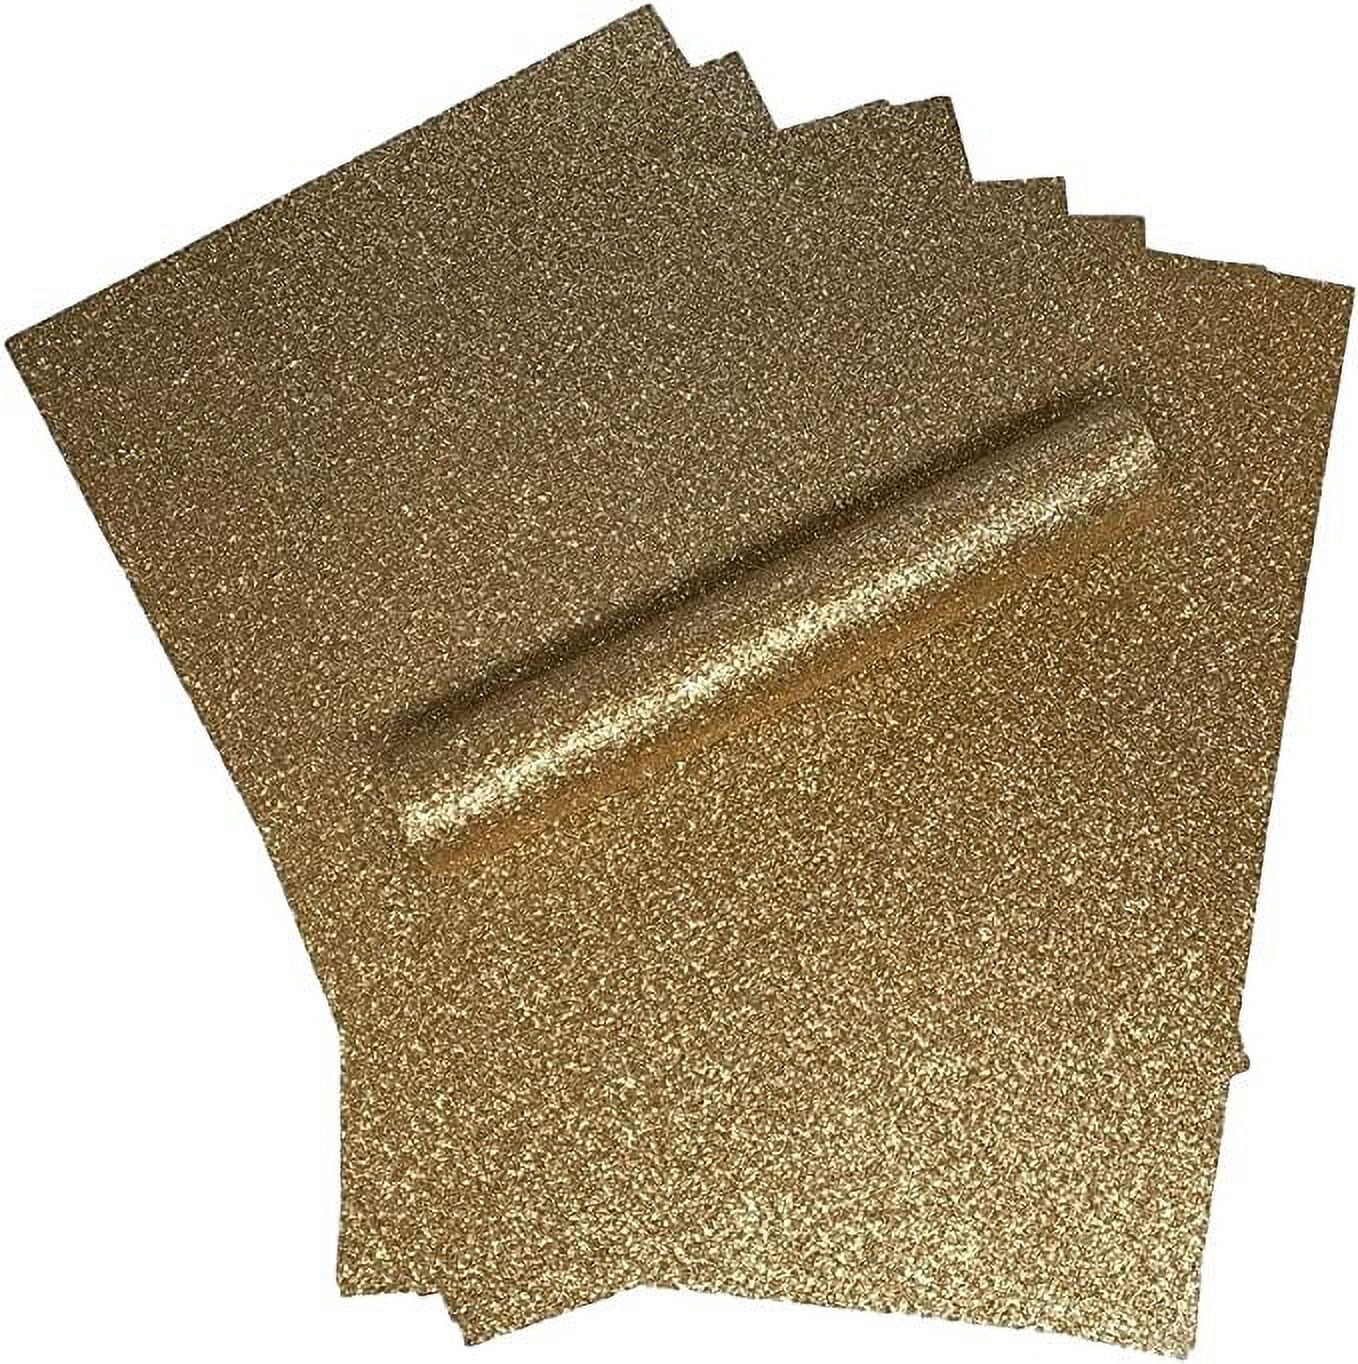 Edible 24K Gold Foil Leaf Sheets,Real Gold Leaf Leafing Sheets Foil Paper  for Cake Chocolates Decorating Bakery Pastry Cooking Beauty Routine Makeup